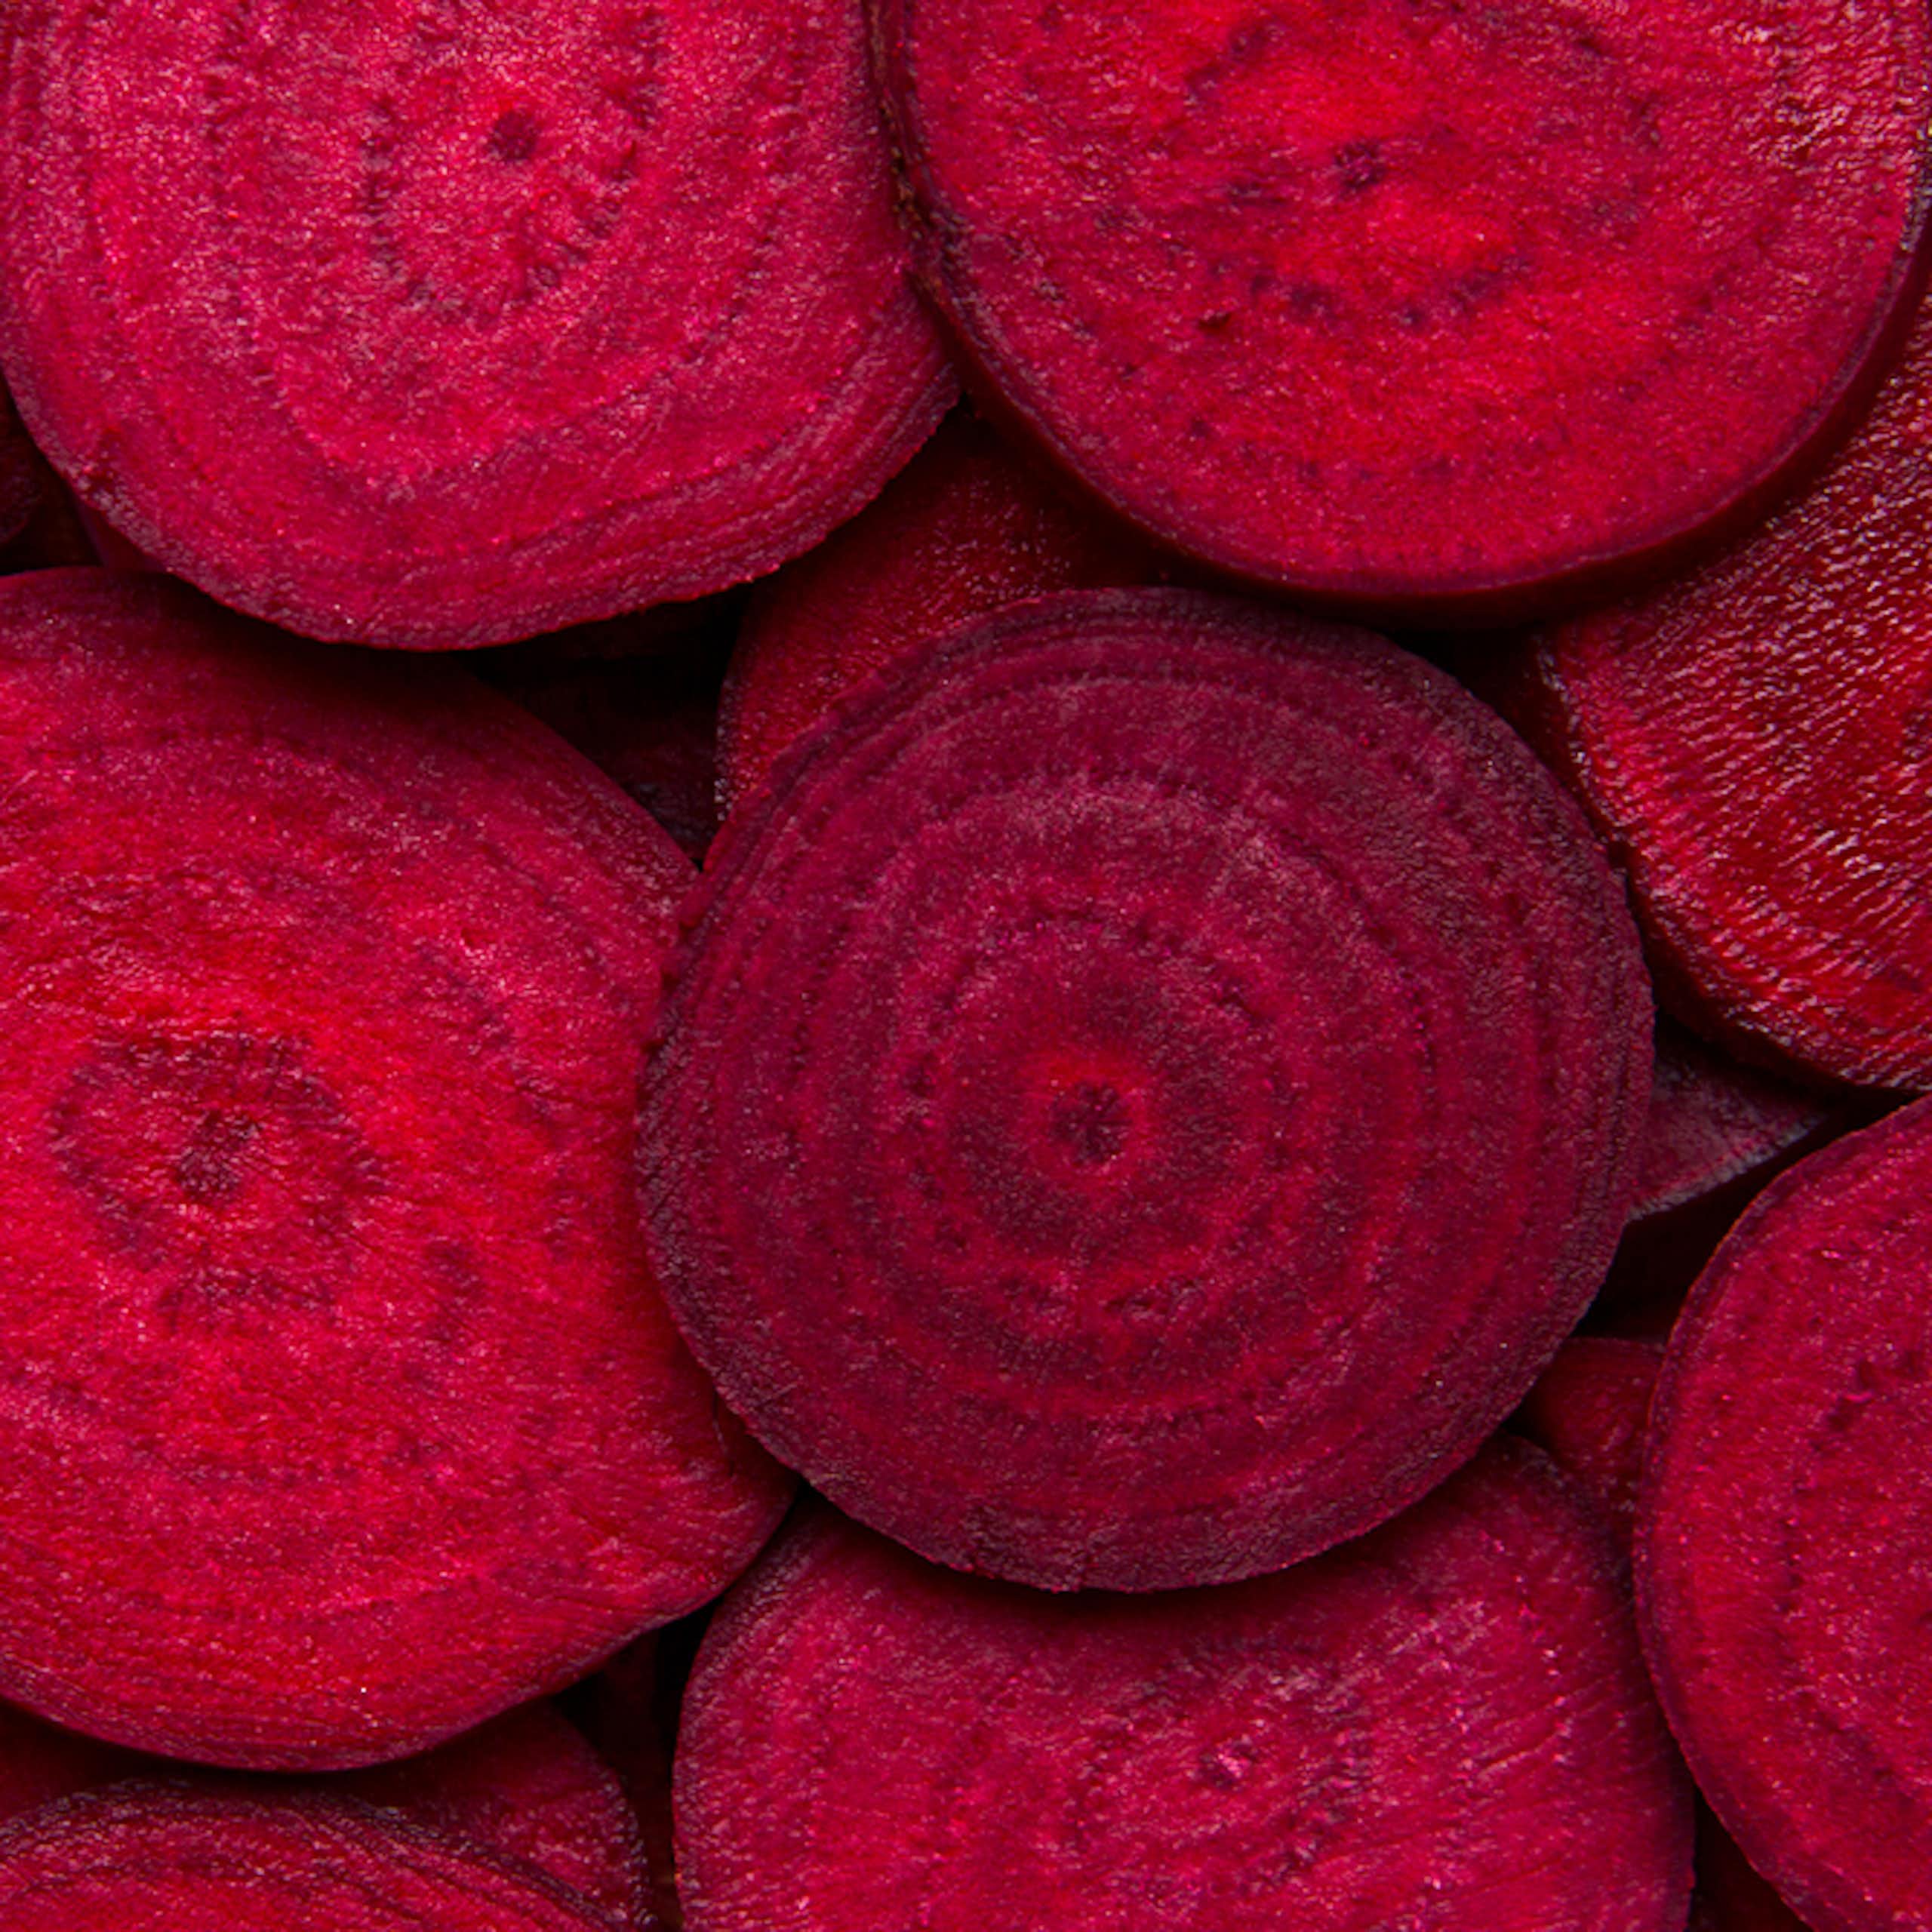 Beetroot slices arranged side by side